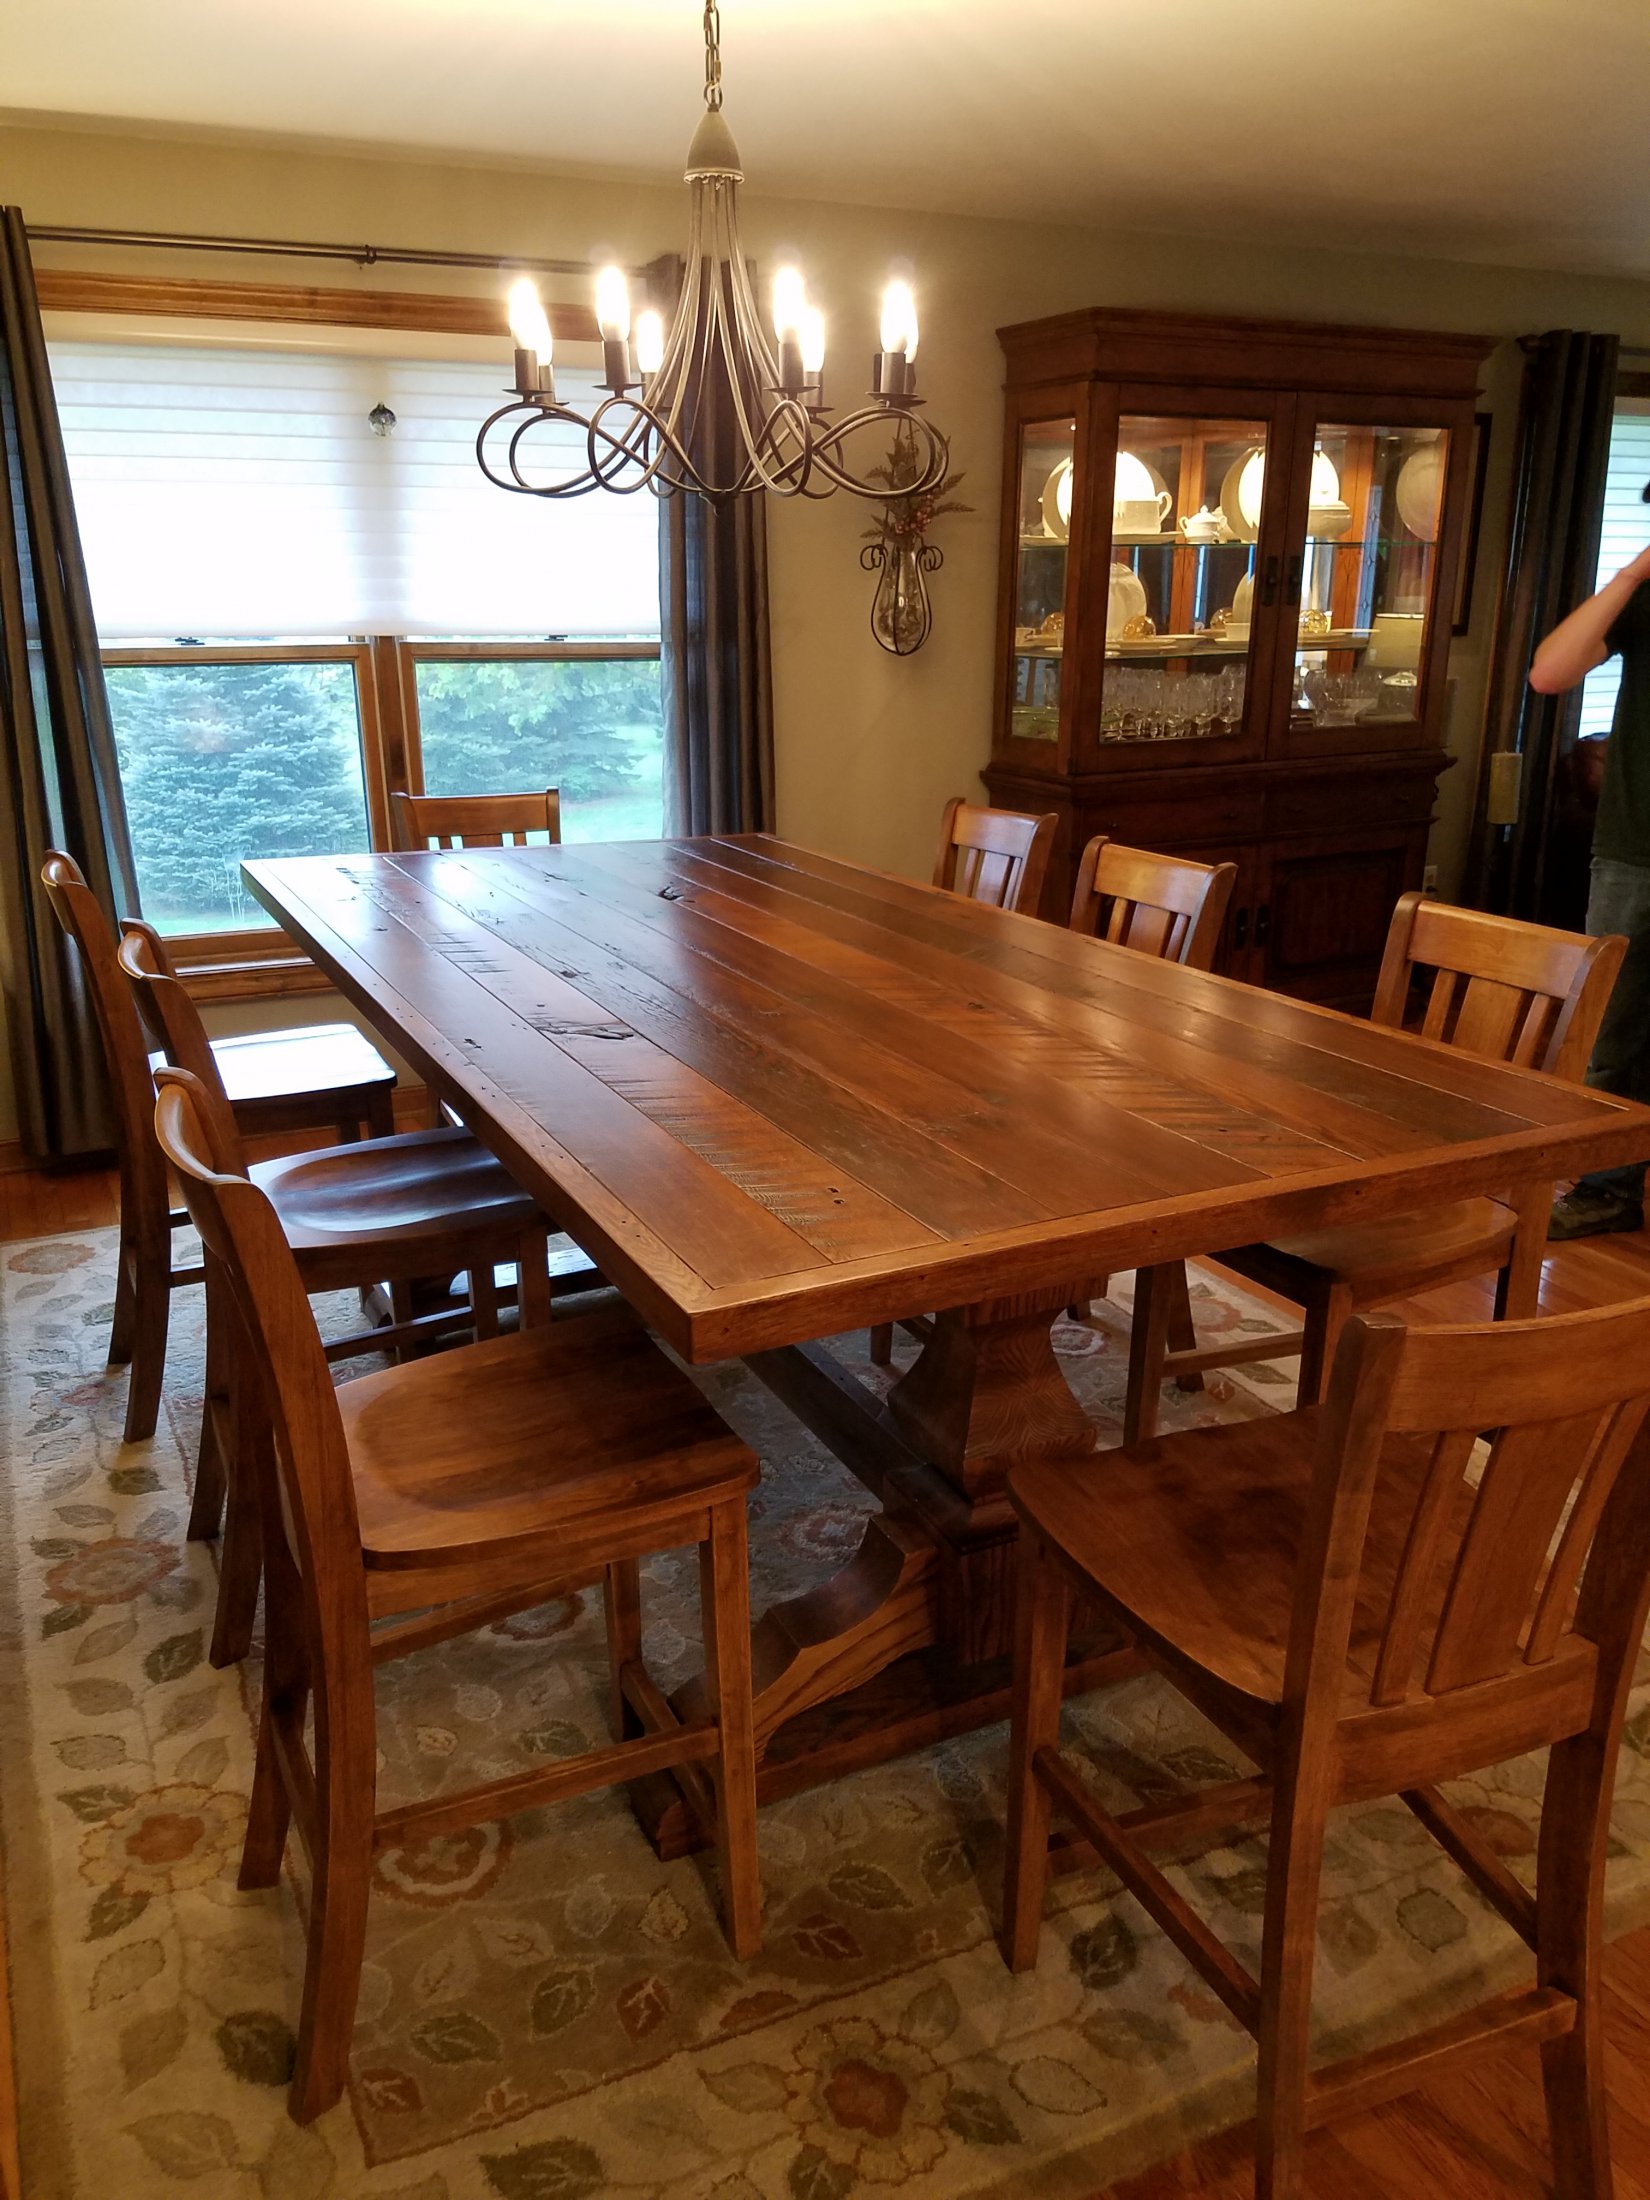 Reclaimed Rustic Oak Table & Chairs